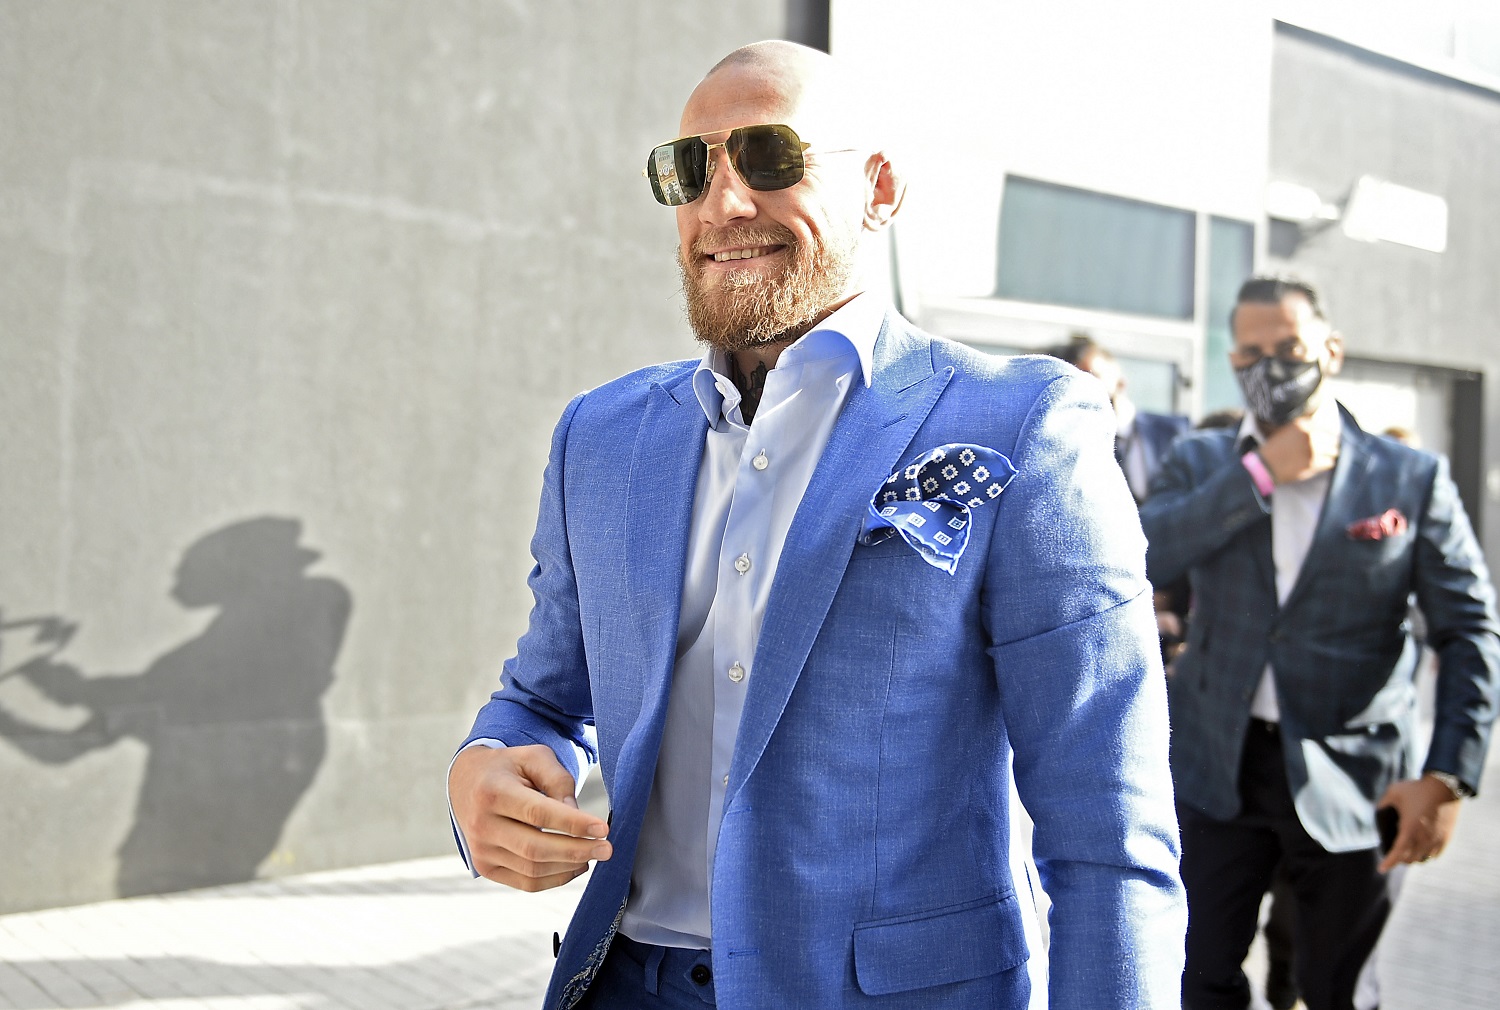 Conor McGregor sold his interest in a whiskey brand earlier this year but has confirmed the purchase of his second pub in Ireland. | Chris Unger/Zuffa LLC